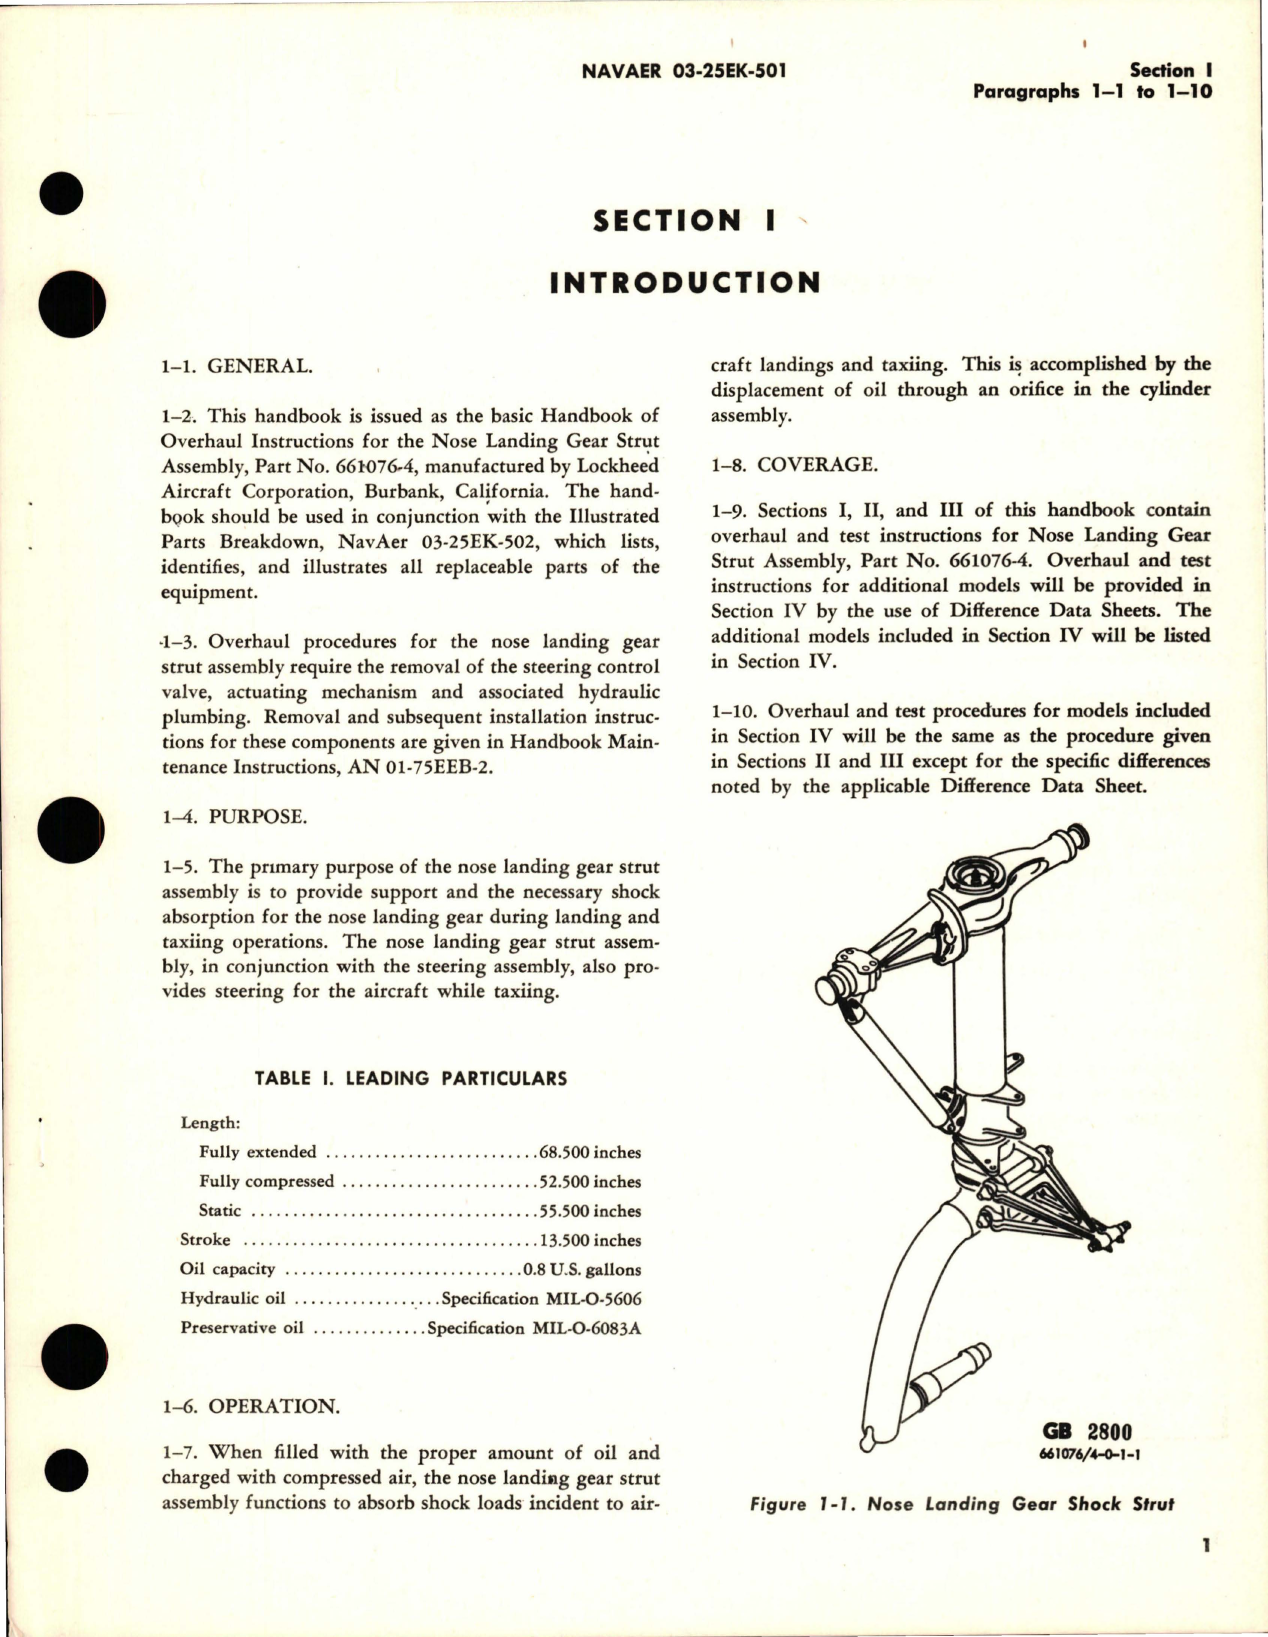 Sample page 5 from AirCorps Library document: Overhaul Instructions for Nose Landing Gear Strut Assembly - Part 661076-4